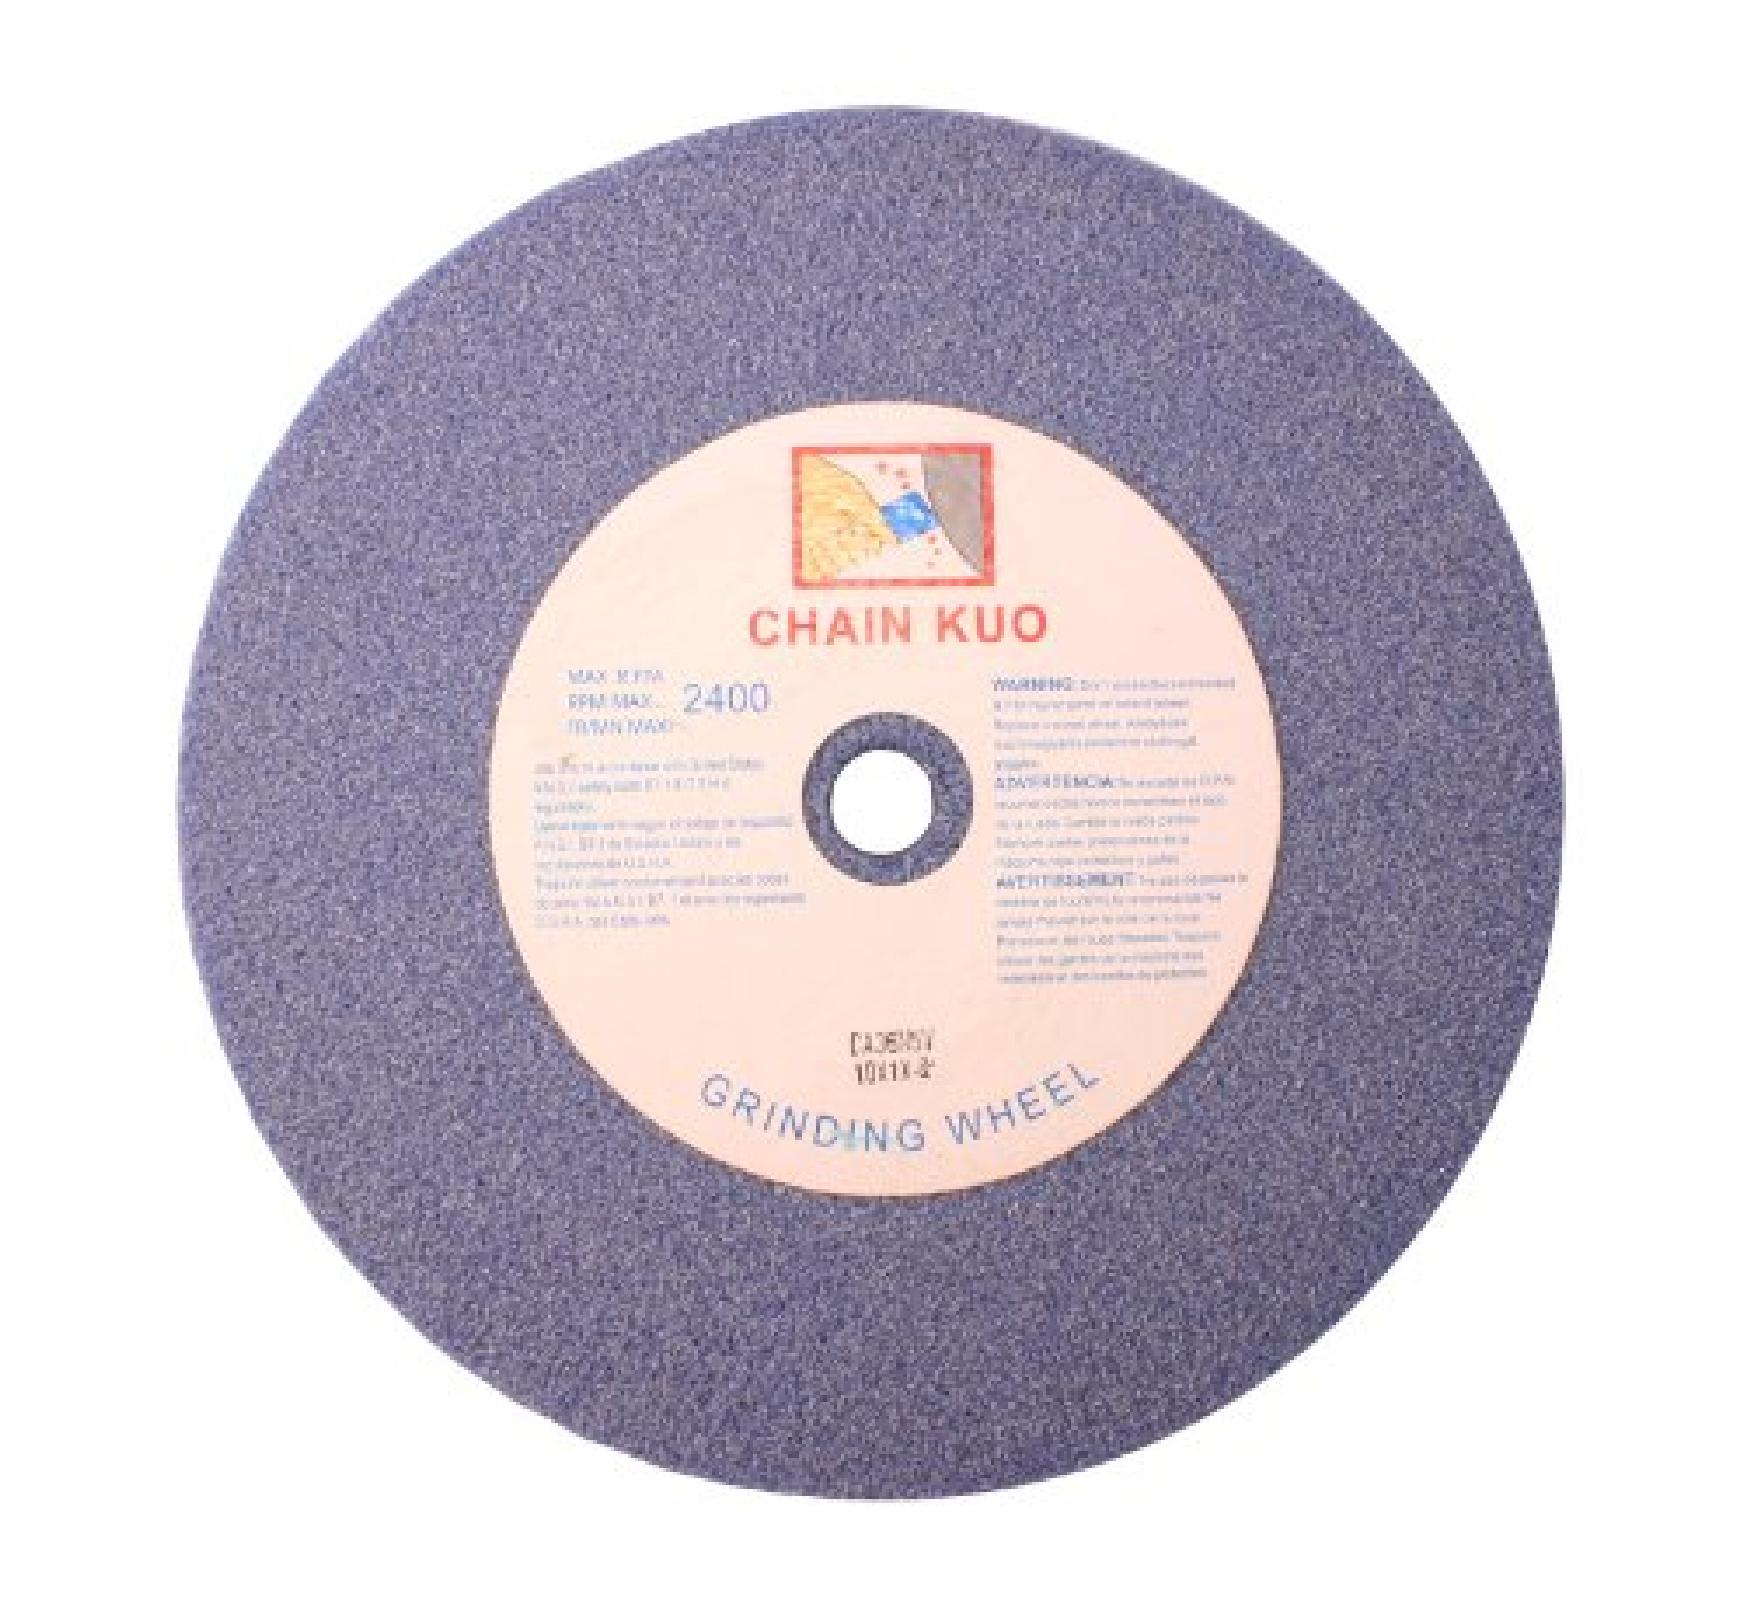 GRINDING WHEEL 10 BLUE 3 part# 88-049 by Oregon